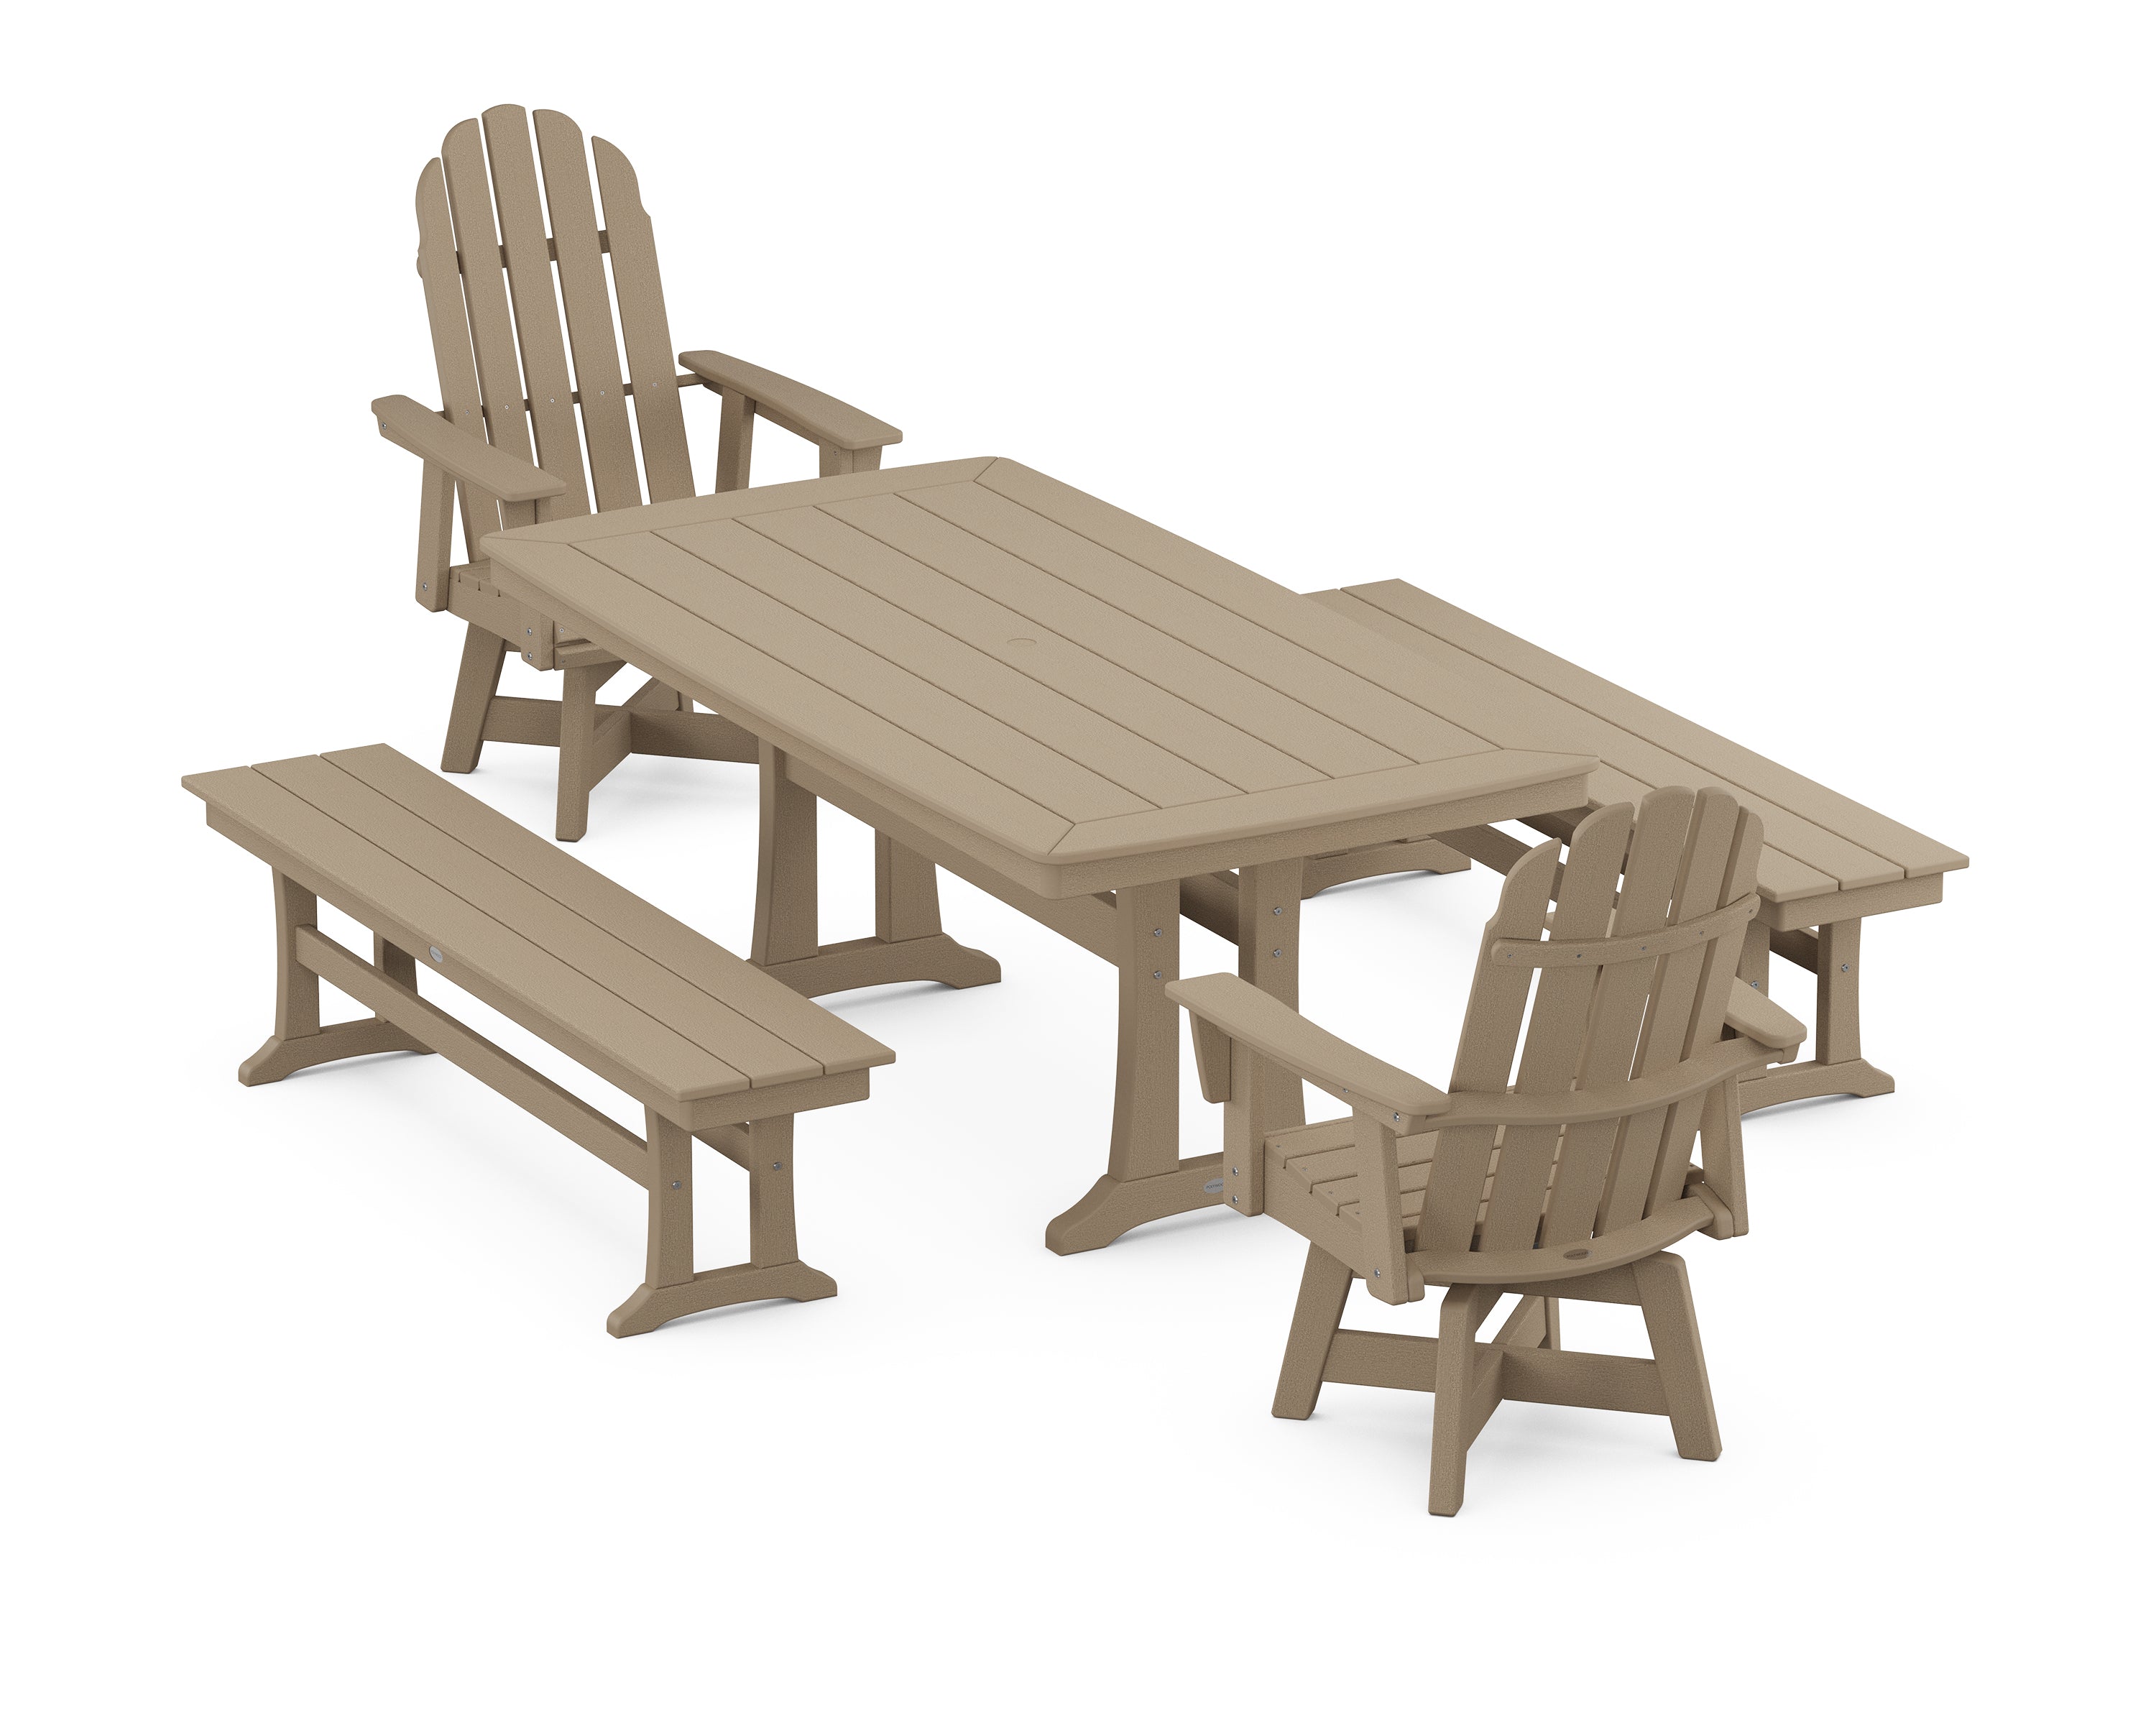 POLYWOOD® Vineyard Adirondack Swivel Chair 5-Piece Dining Set with Trestle Legs and Benches in Vintage Sahara